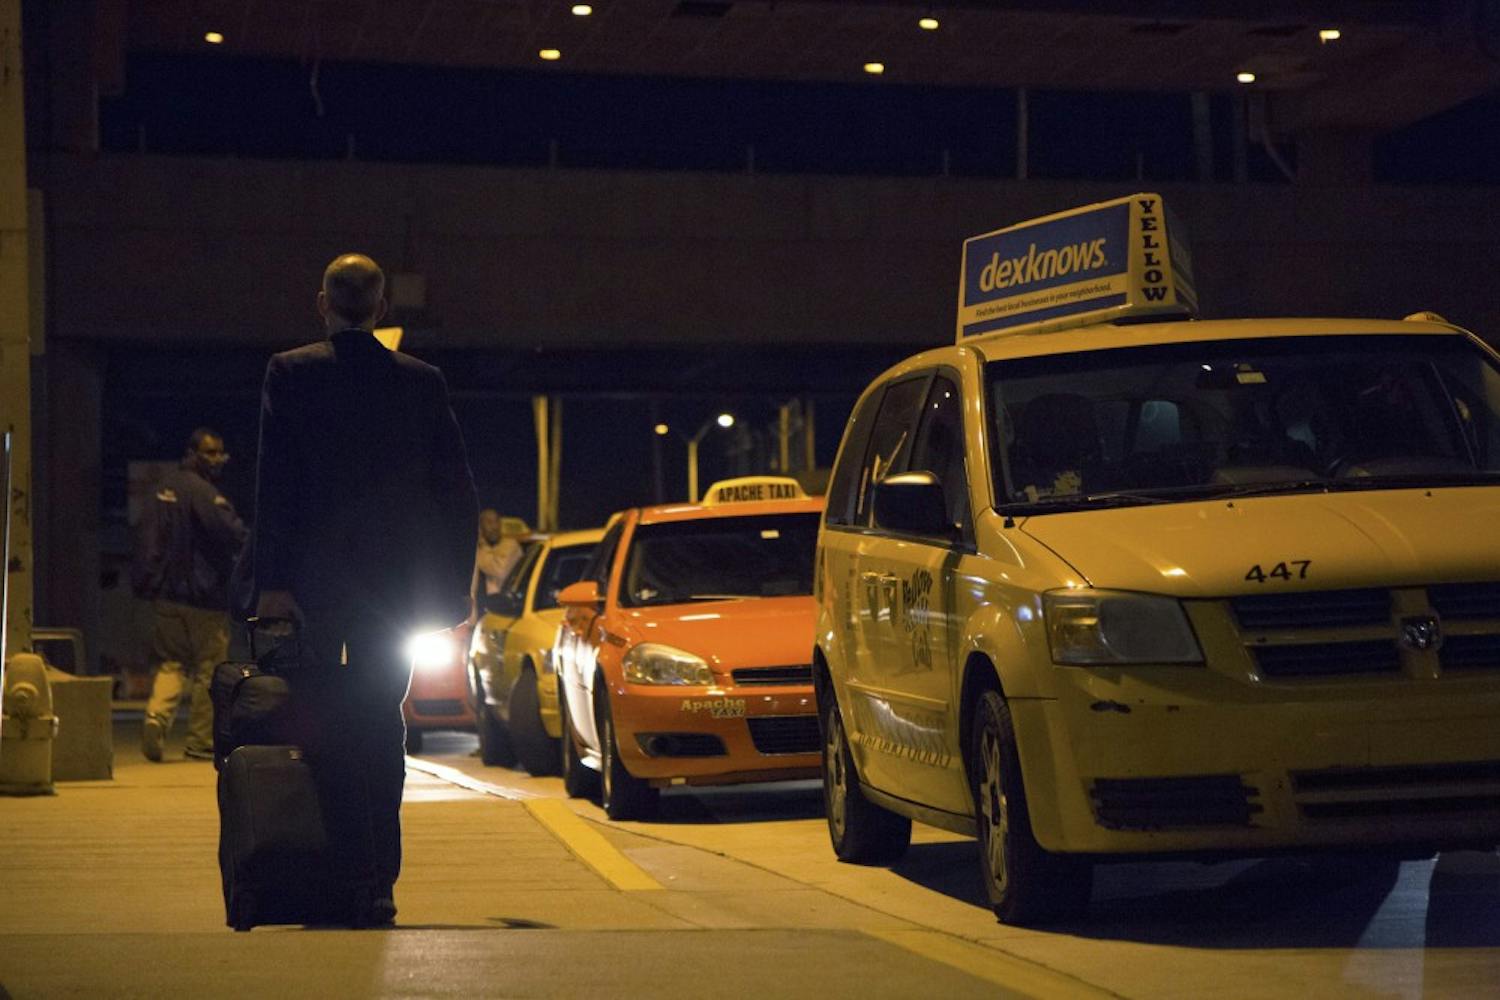 A man walks along the curb of the taxi pickup lane at  Phoenix Sky Harbor International Airport  in Phoenix, on Wednesday, Jan. 20, 2016.